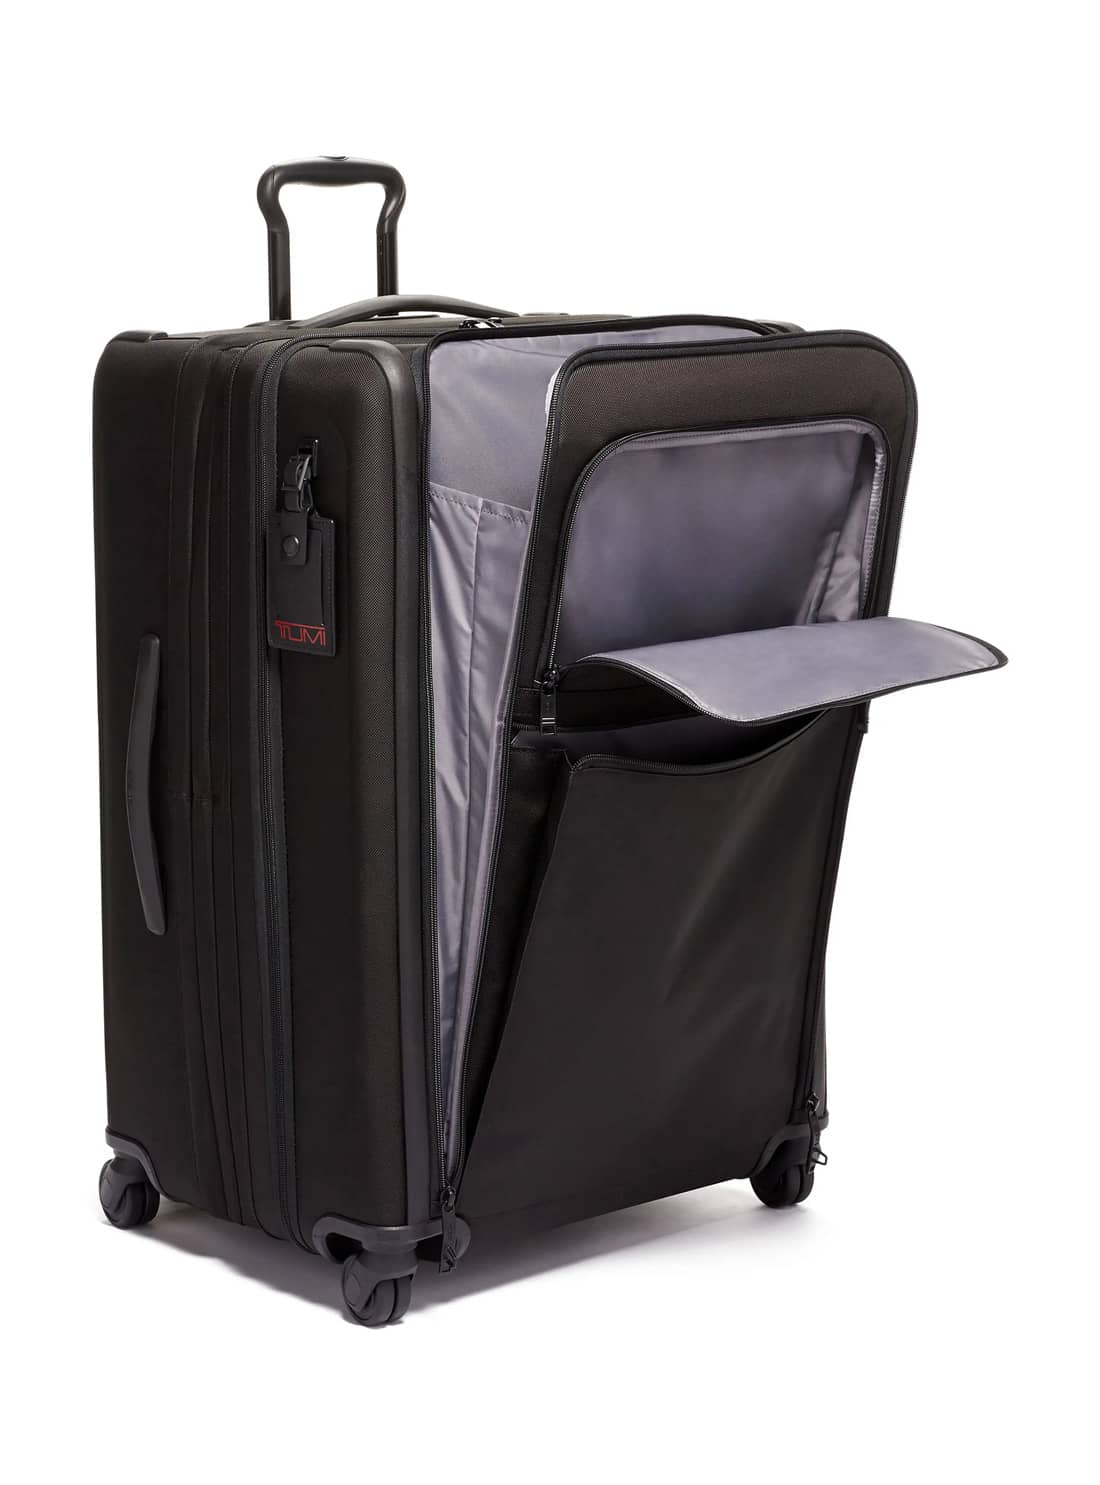 Best Checked Luggage for Suits